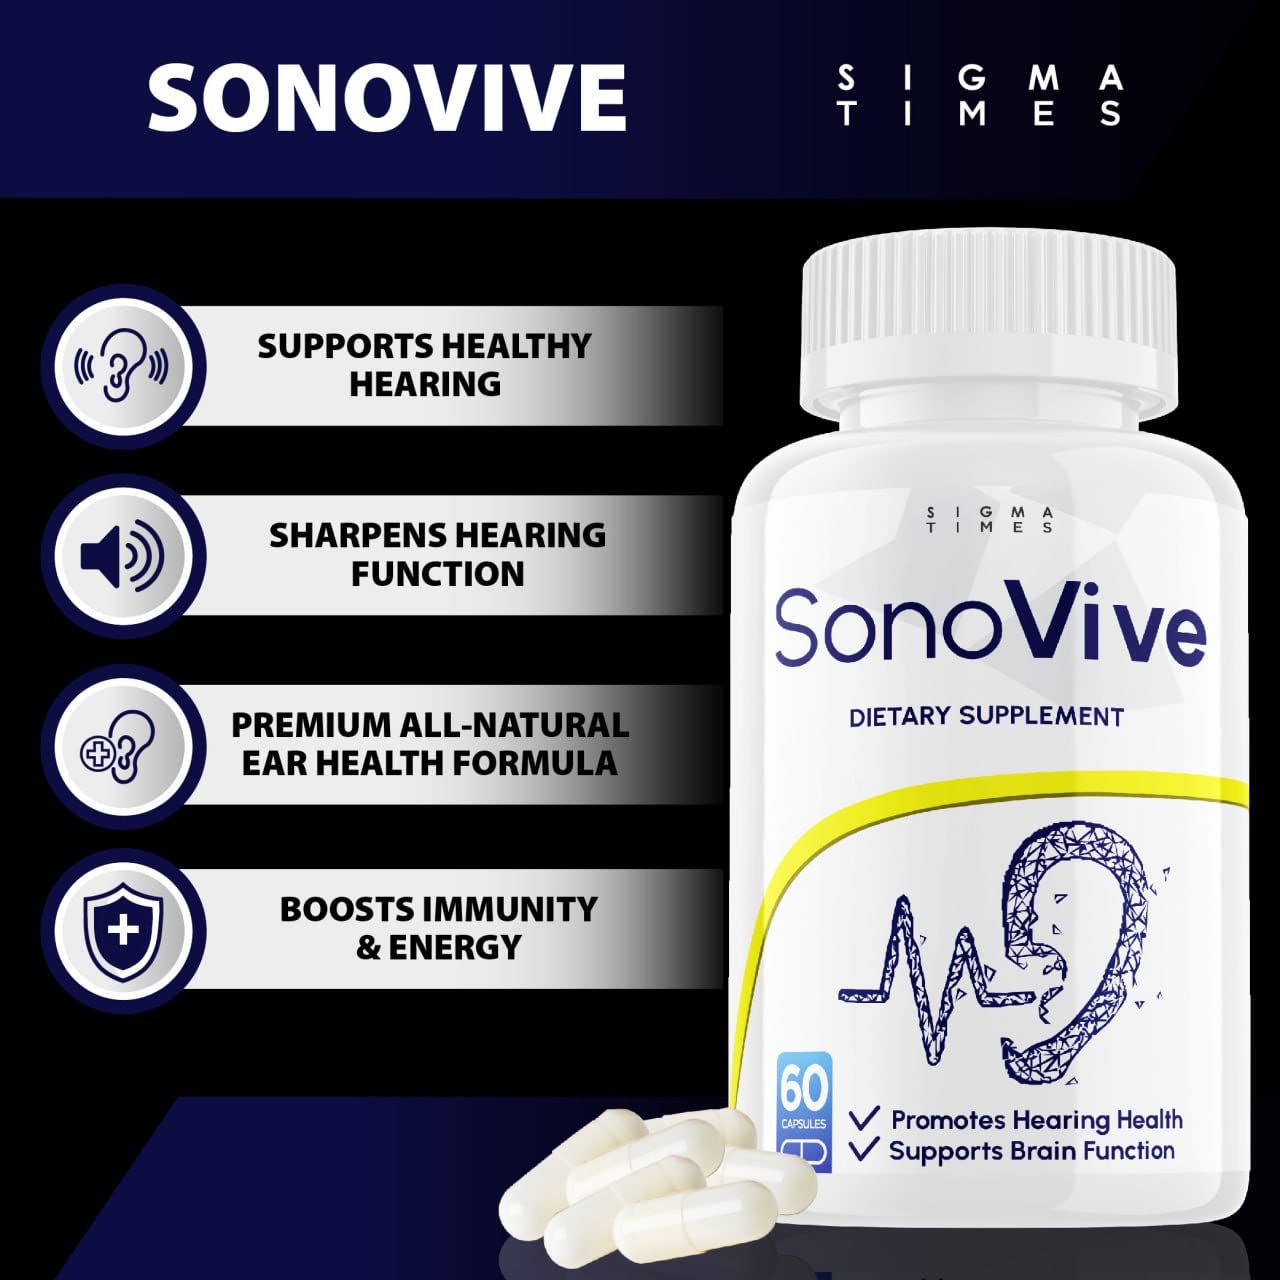 sigma times (2 Pack) Sonovive Capsules for Hearing, Sonovive Pills Supplement Loss Hearing (120 Capsules)